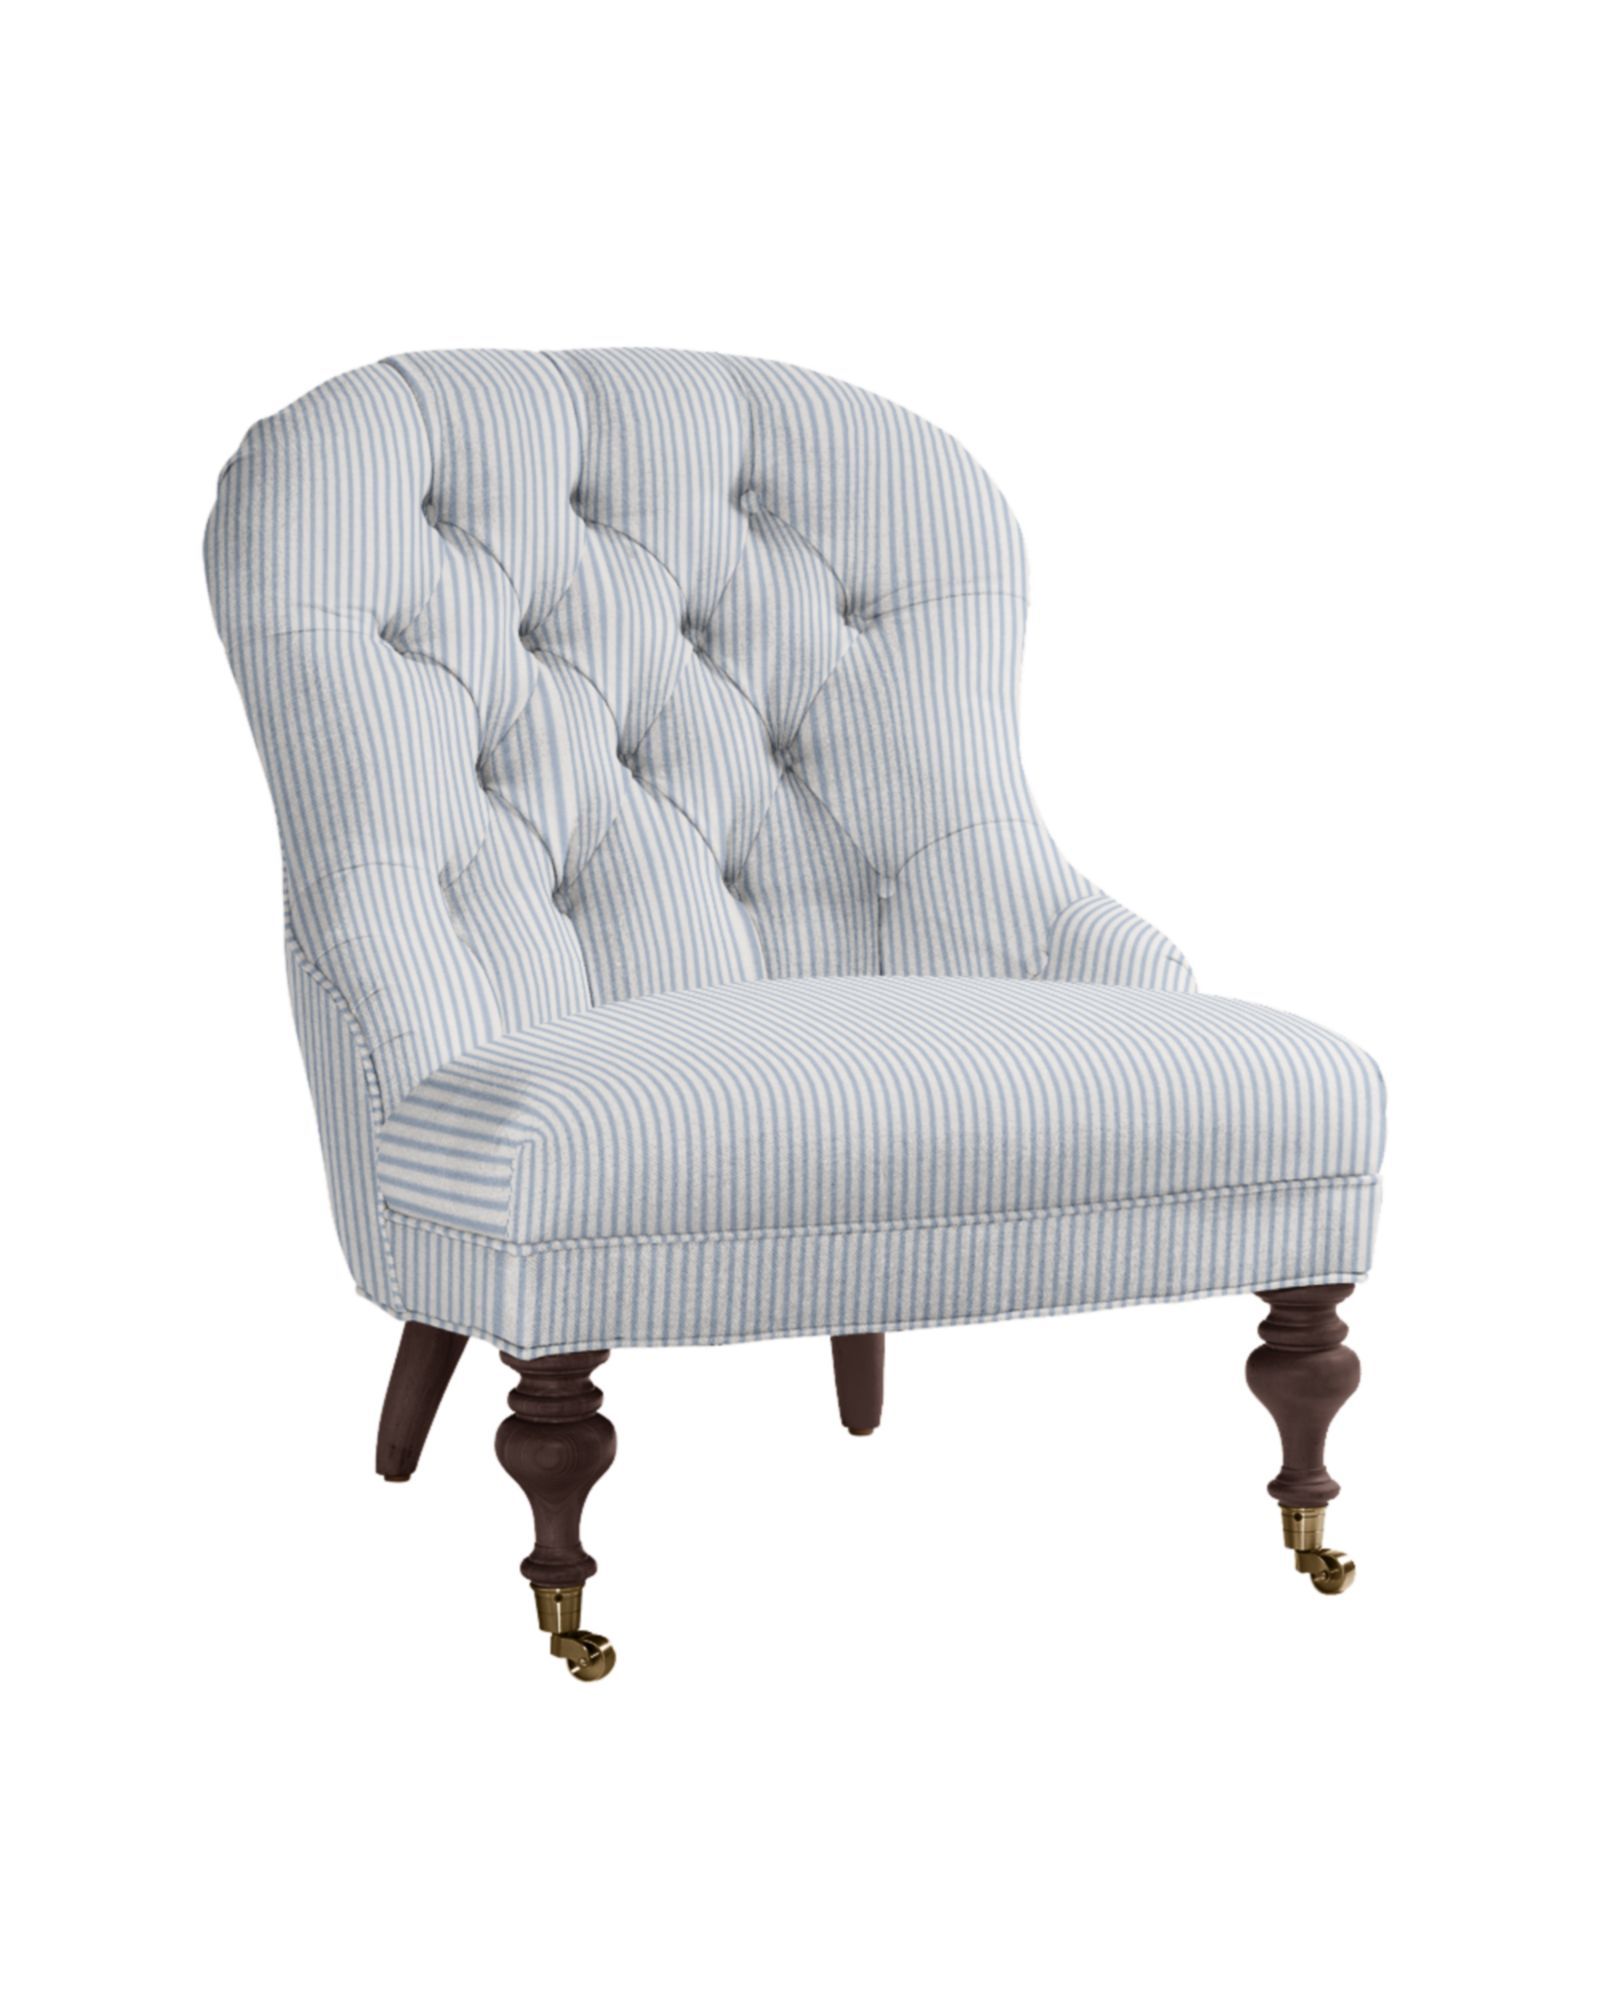 Piccadilly Chair | Serena and Lily